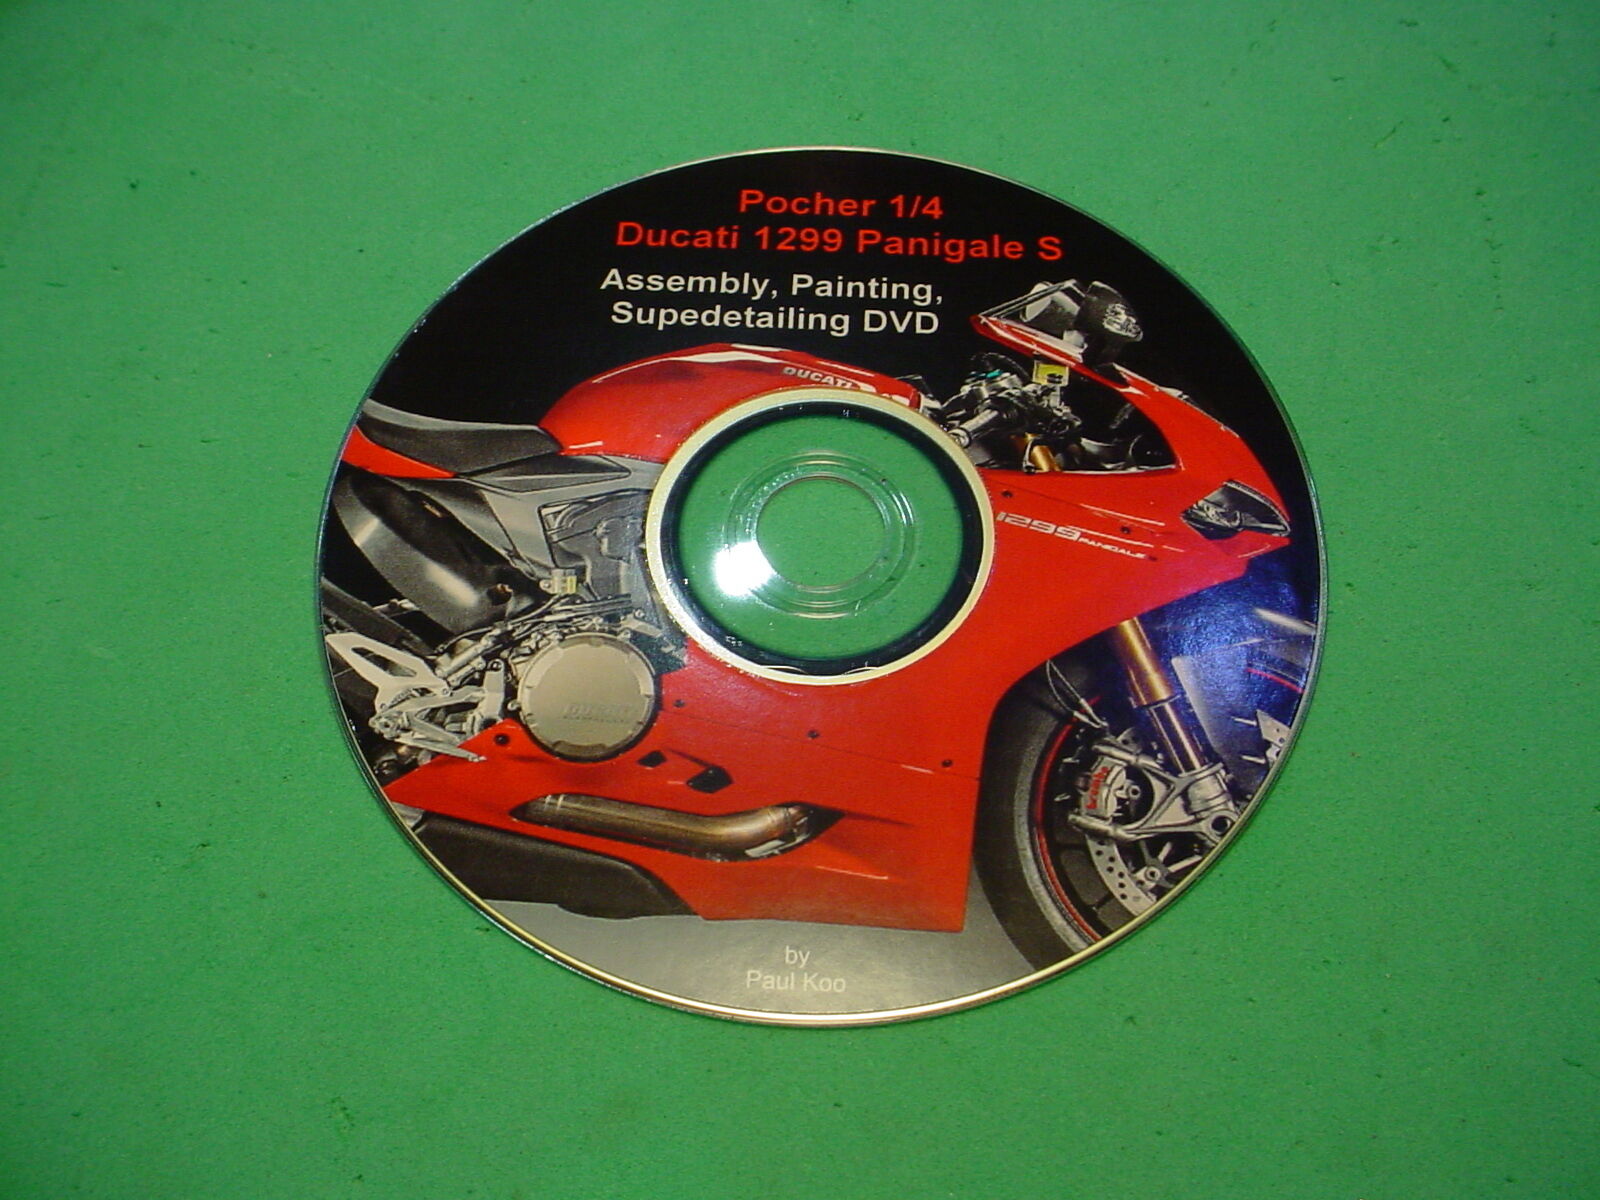 POCHER 1/4 DUCATI 1299 PANIGALE ASSEMBLY, PAINTING & SUPERDETAILING DVD/DOWNLOAD